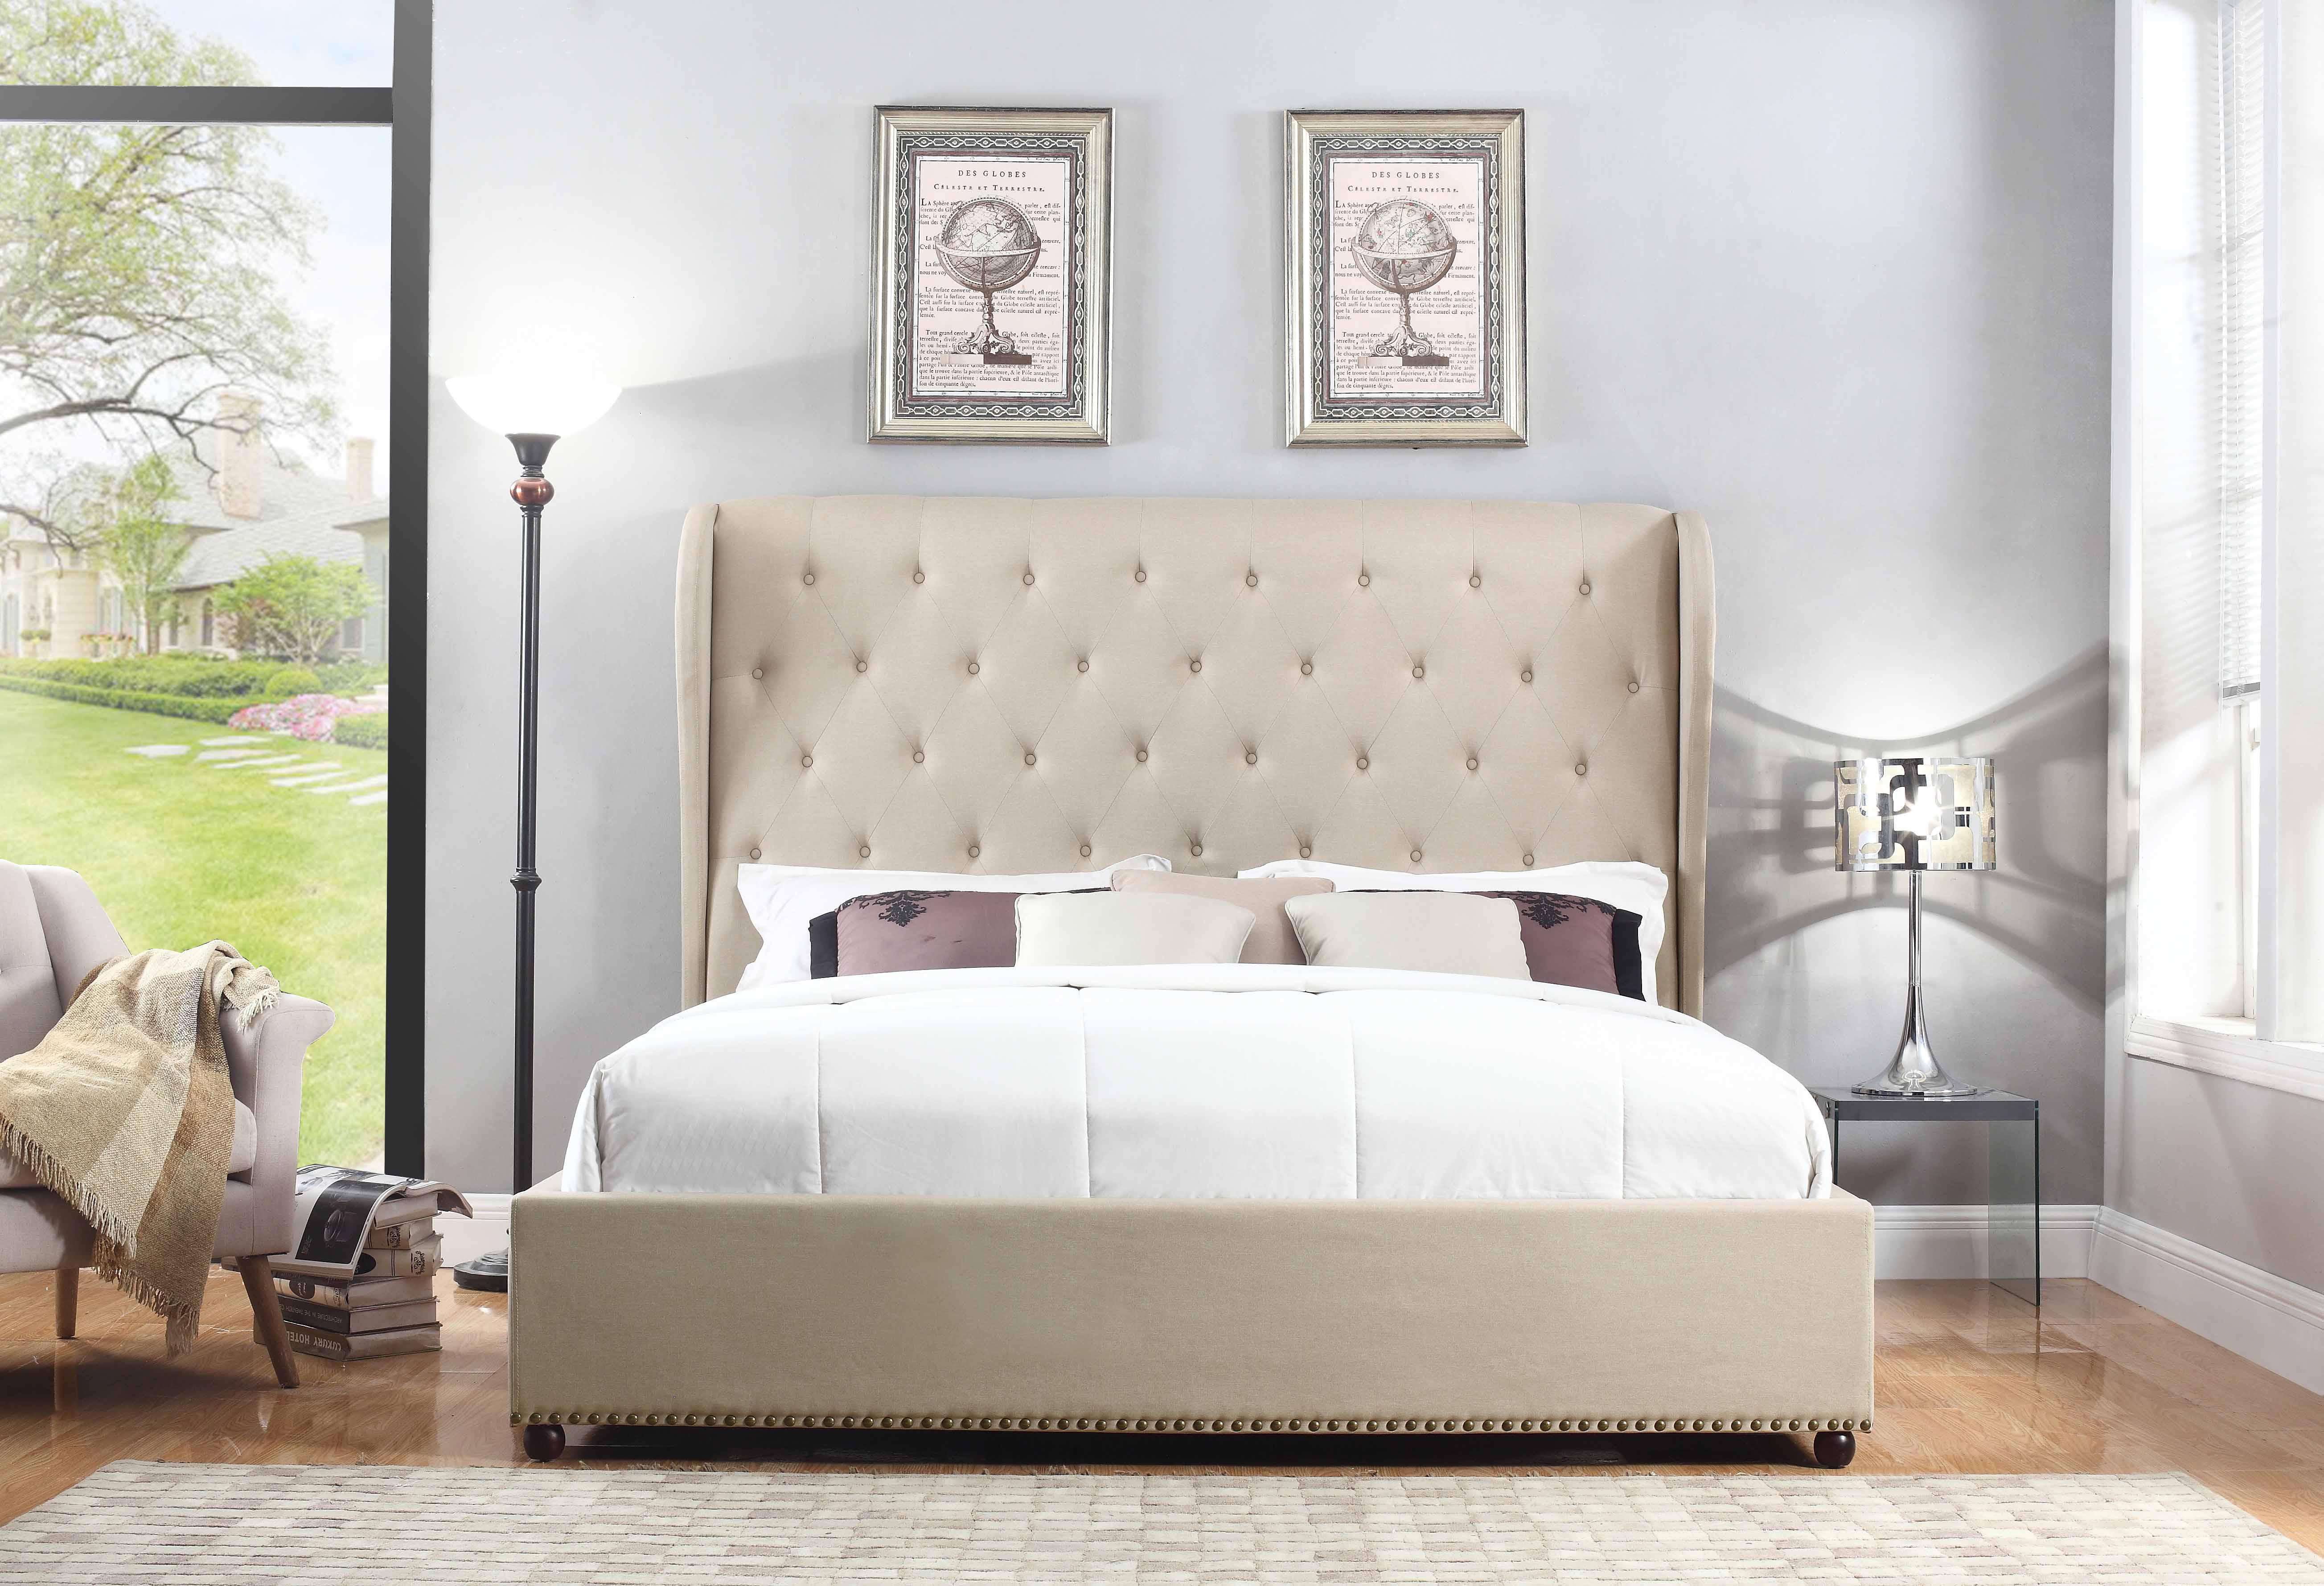 Bed Frame King Size in Beige Fabric Upholstered French Provincial High Bedhead